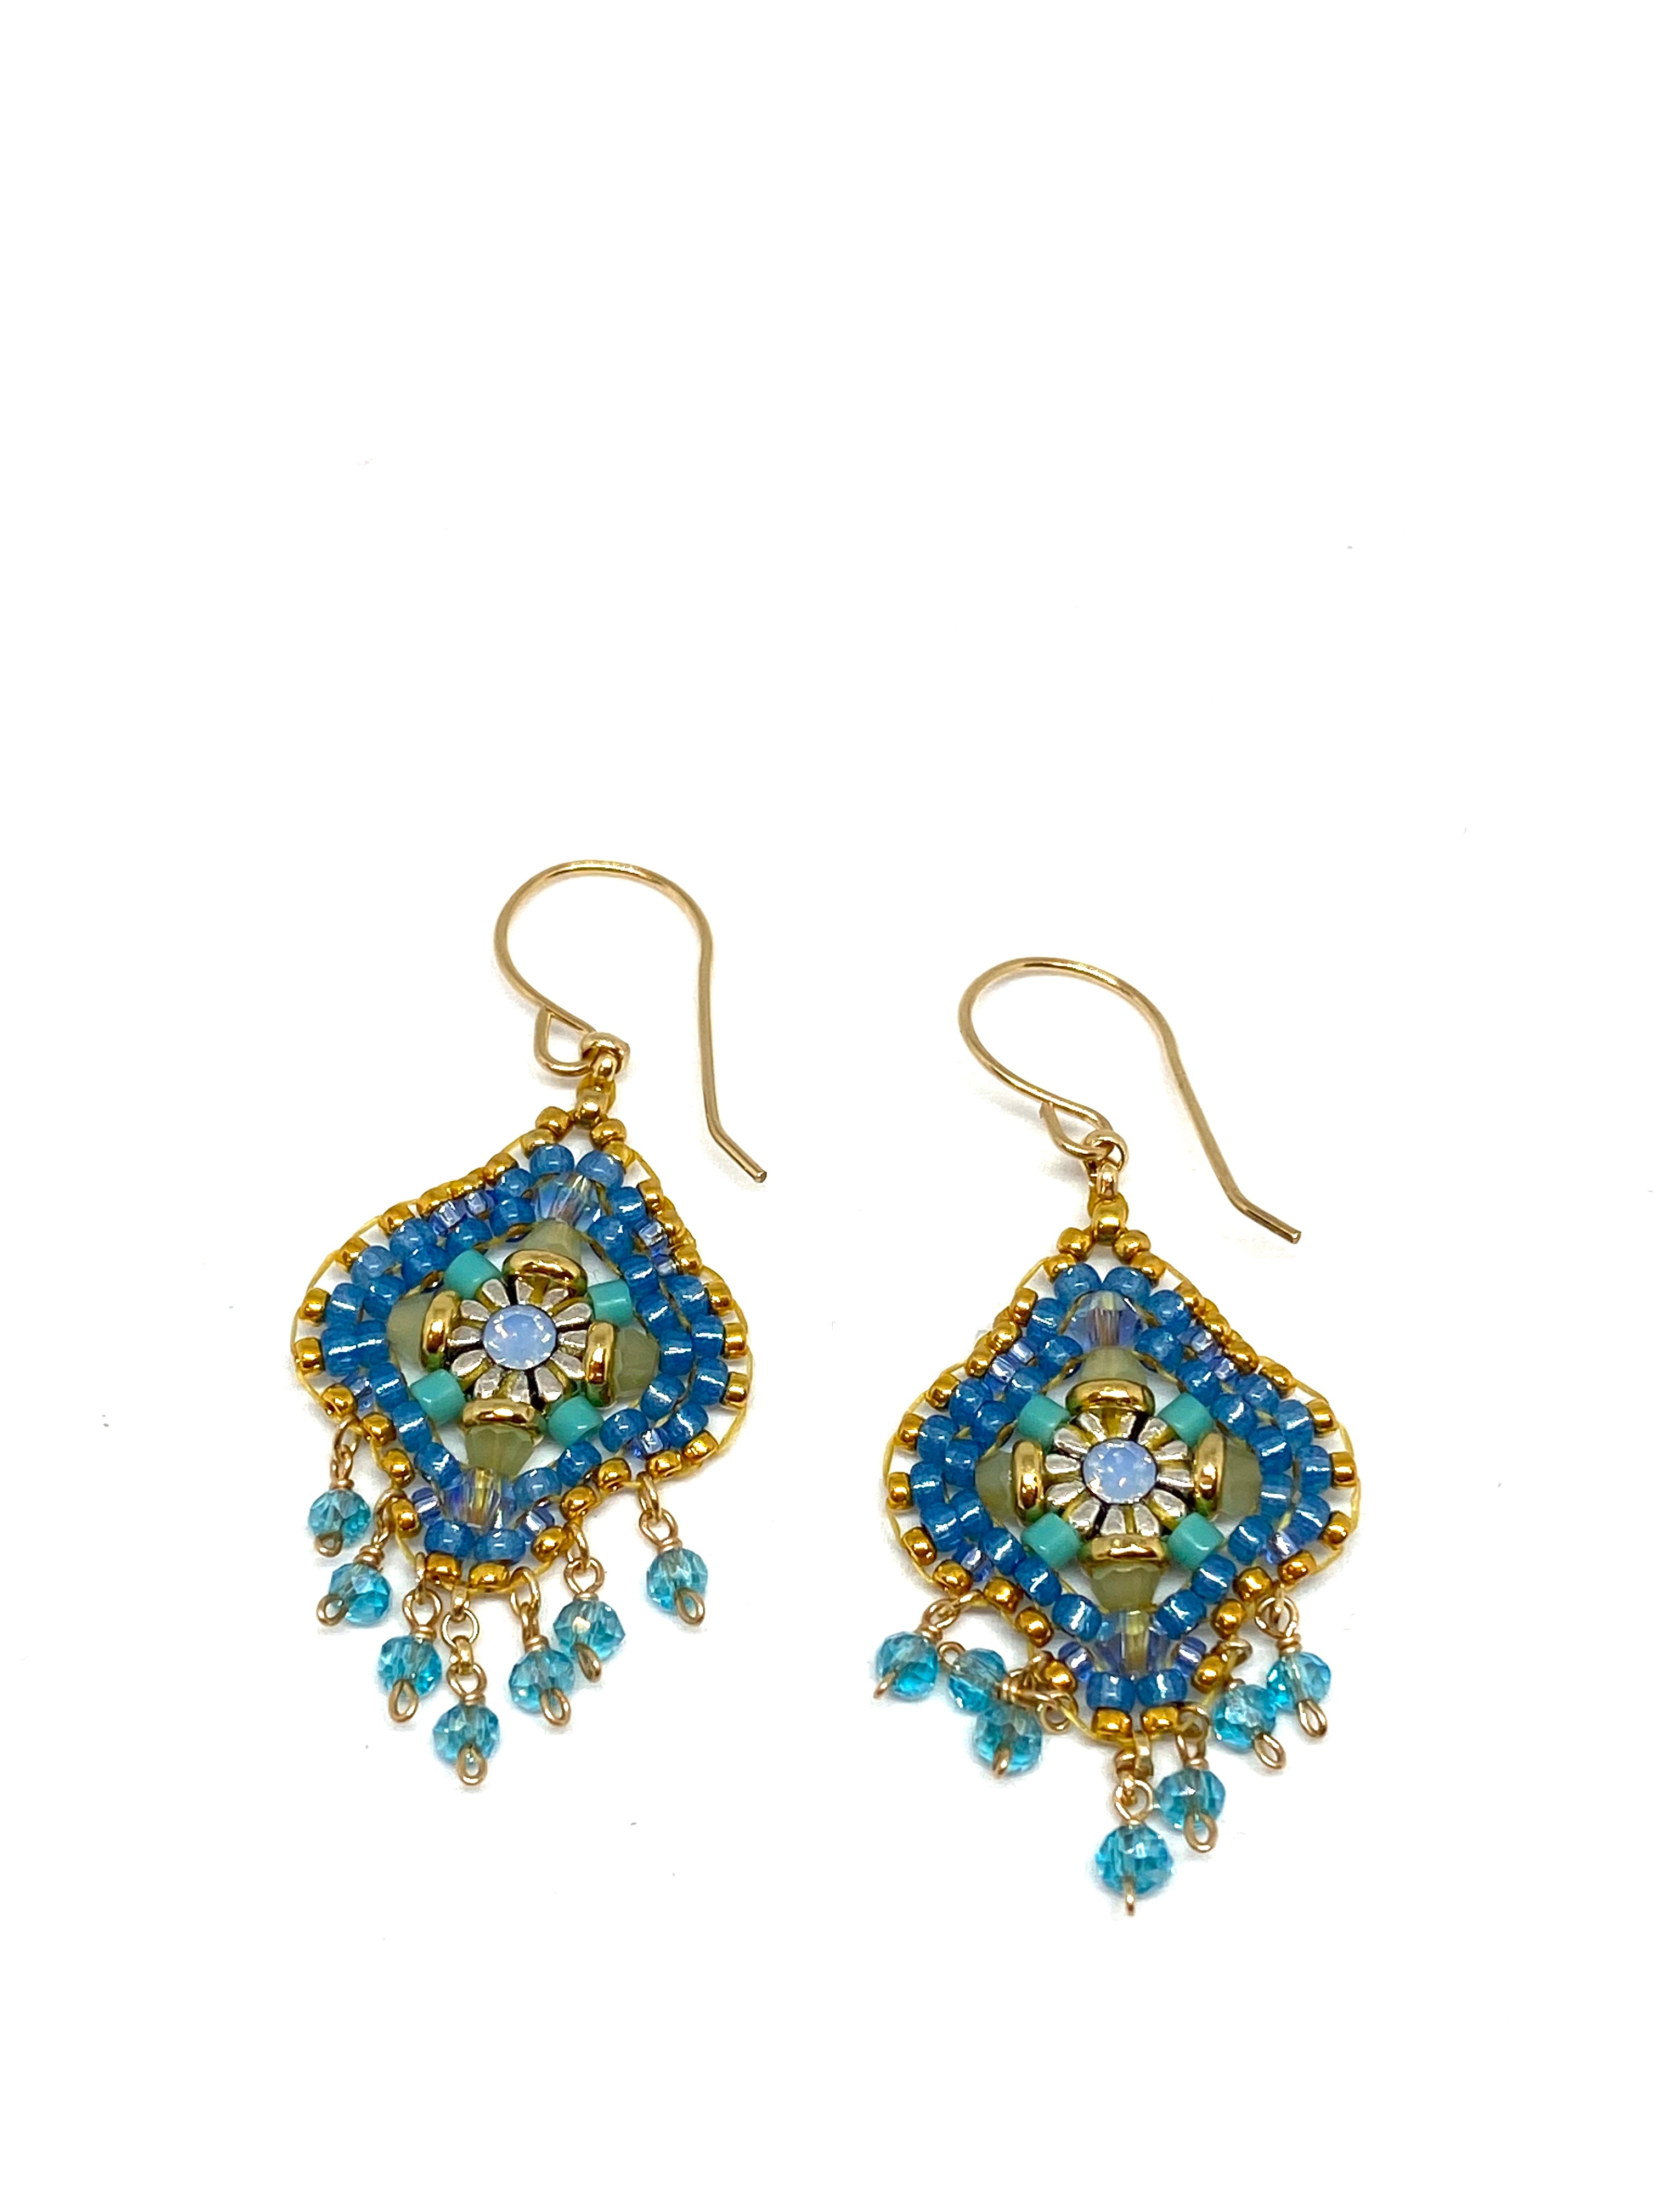 Miguel Ases Swarovski Crystal and Turquoise Miyuki Bead Earrings, found at Patricia in Southern Pines, NC